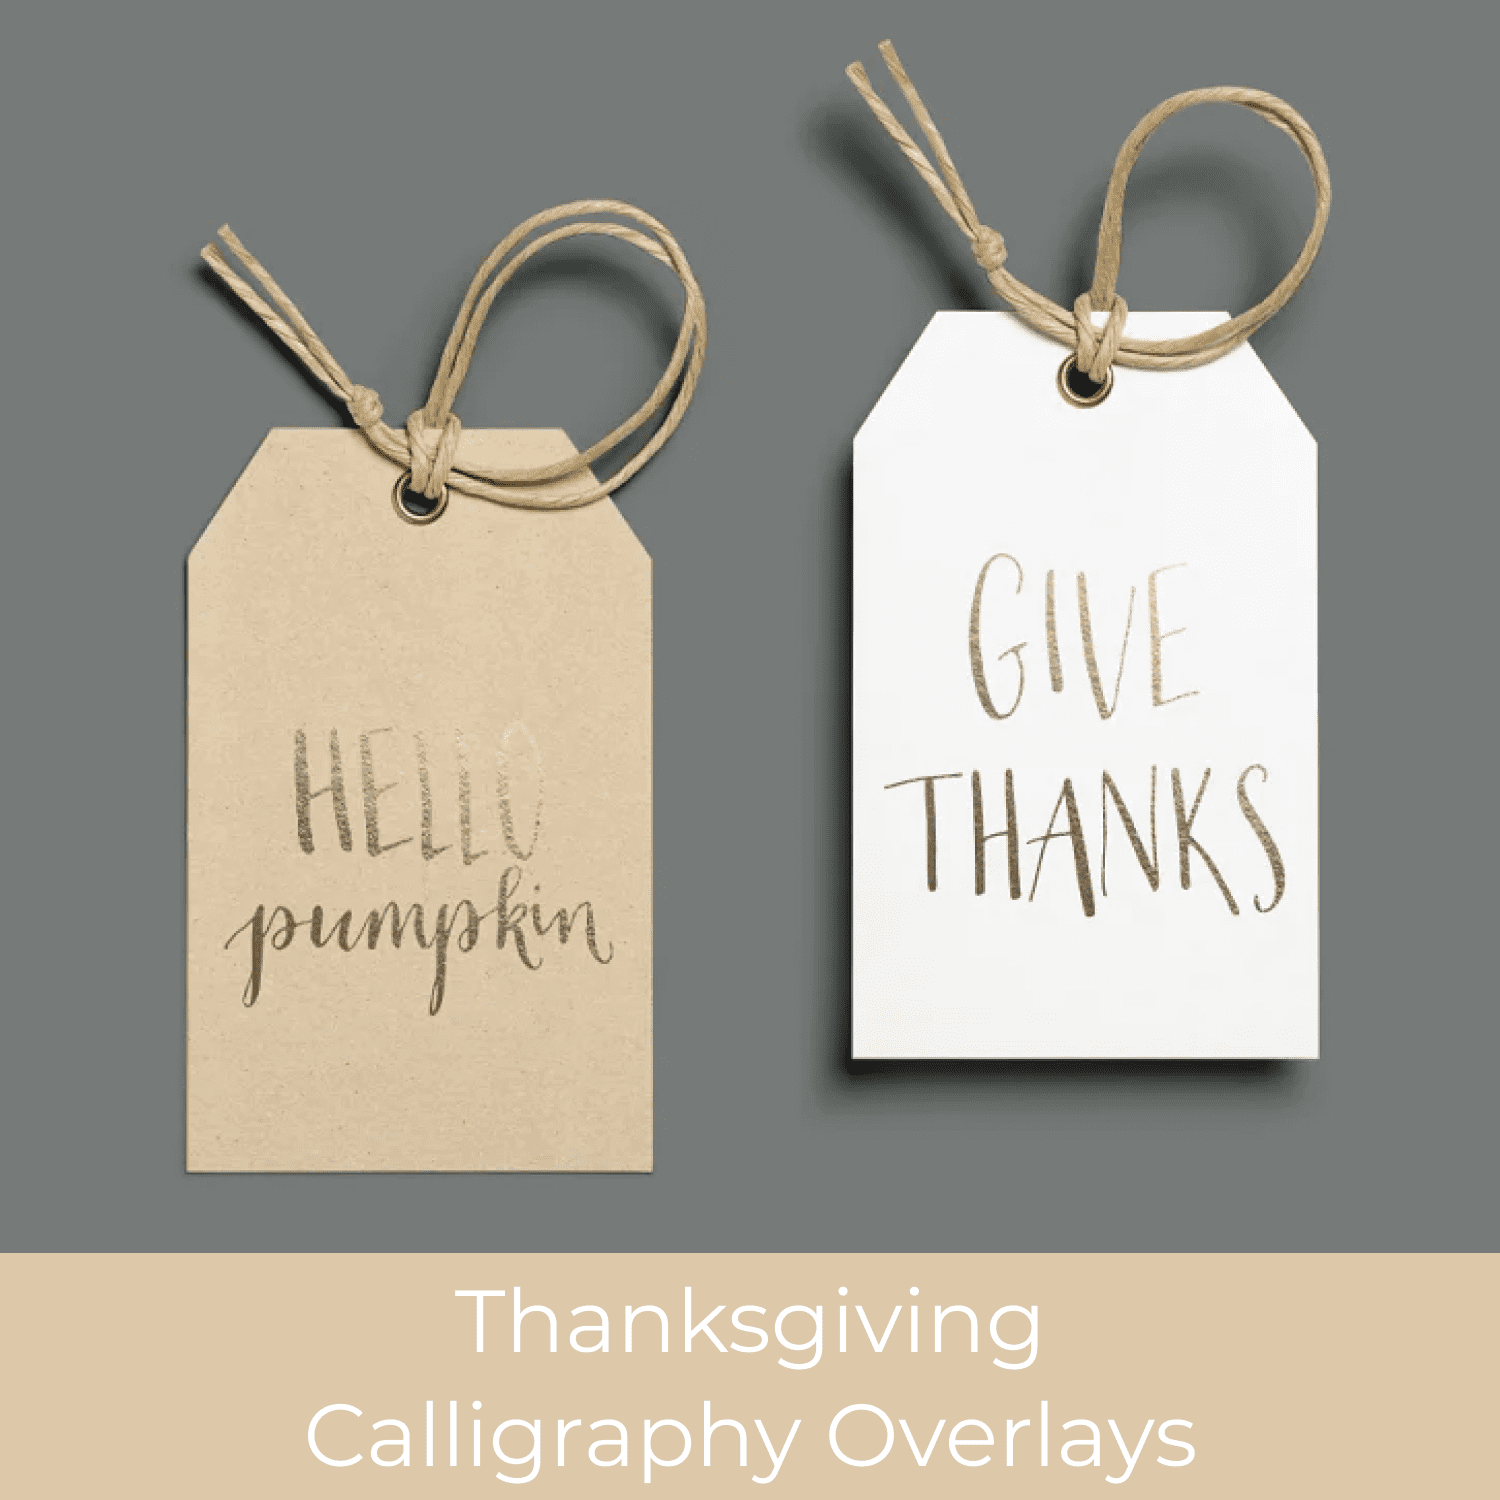 Thanksgiving Calligraphy Overlays cover.